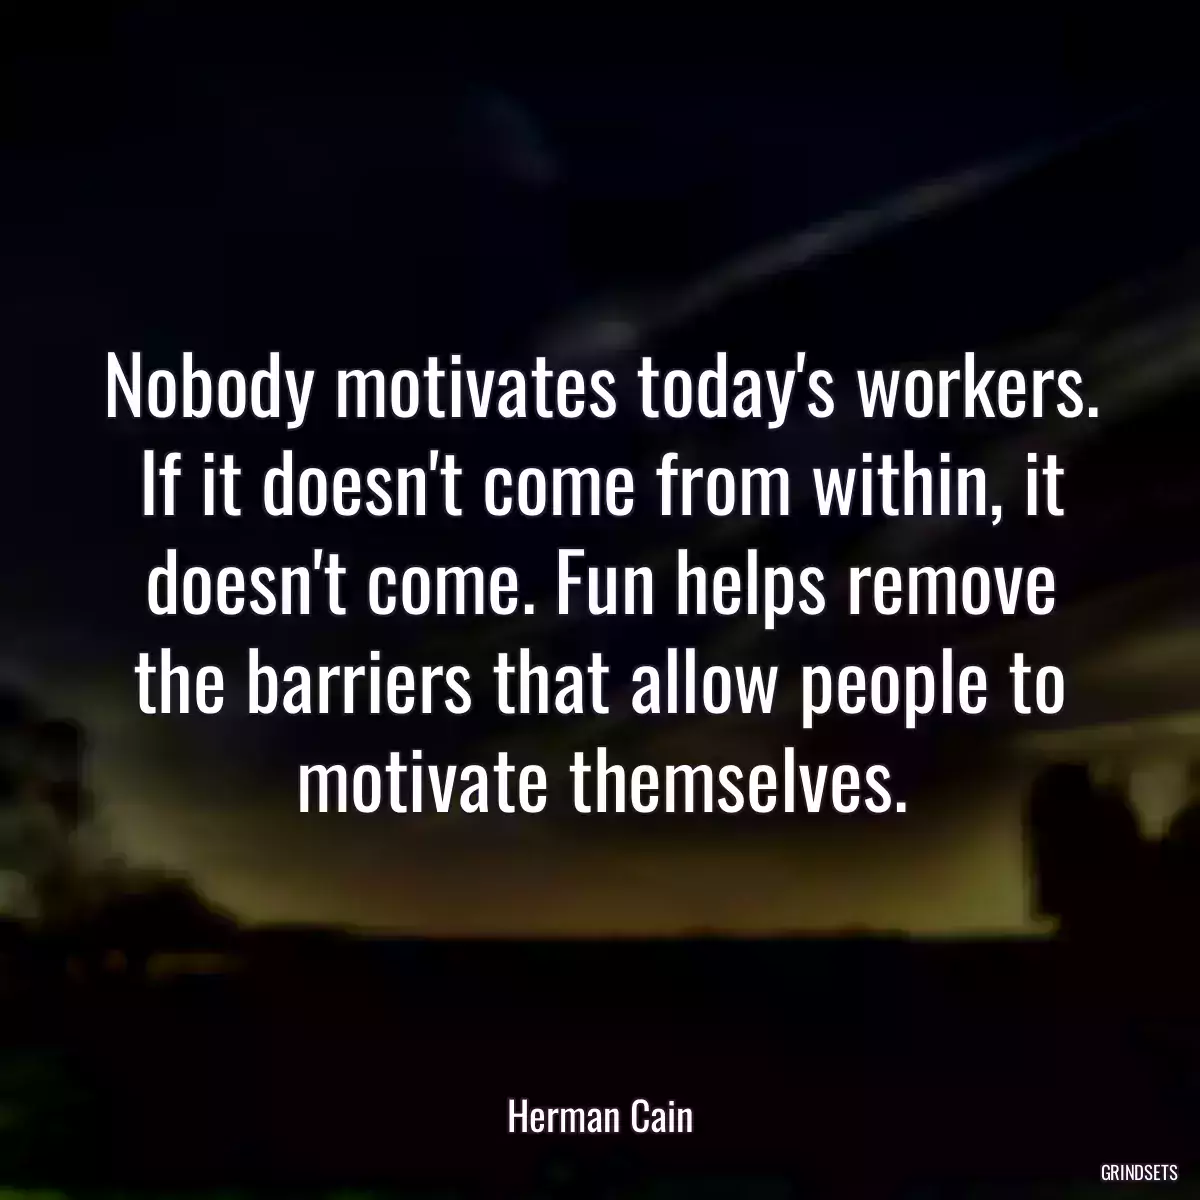 Nobody motivates today\'s workers. If it doesn\'t come from within, it doesn\'t come. Fun helps remove the barriers that allow people to motivate themselves.